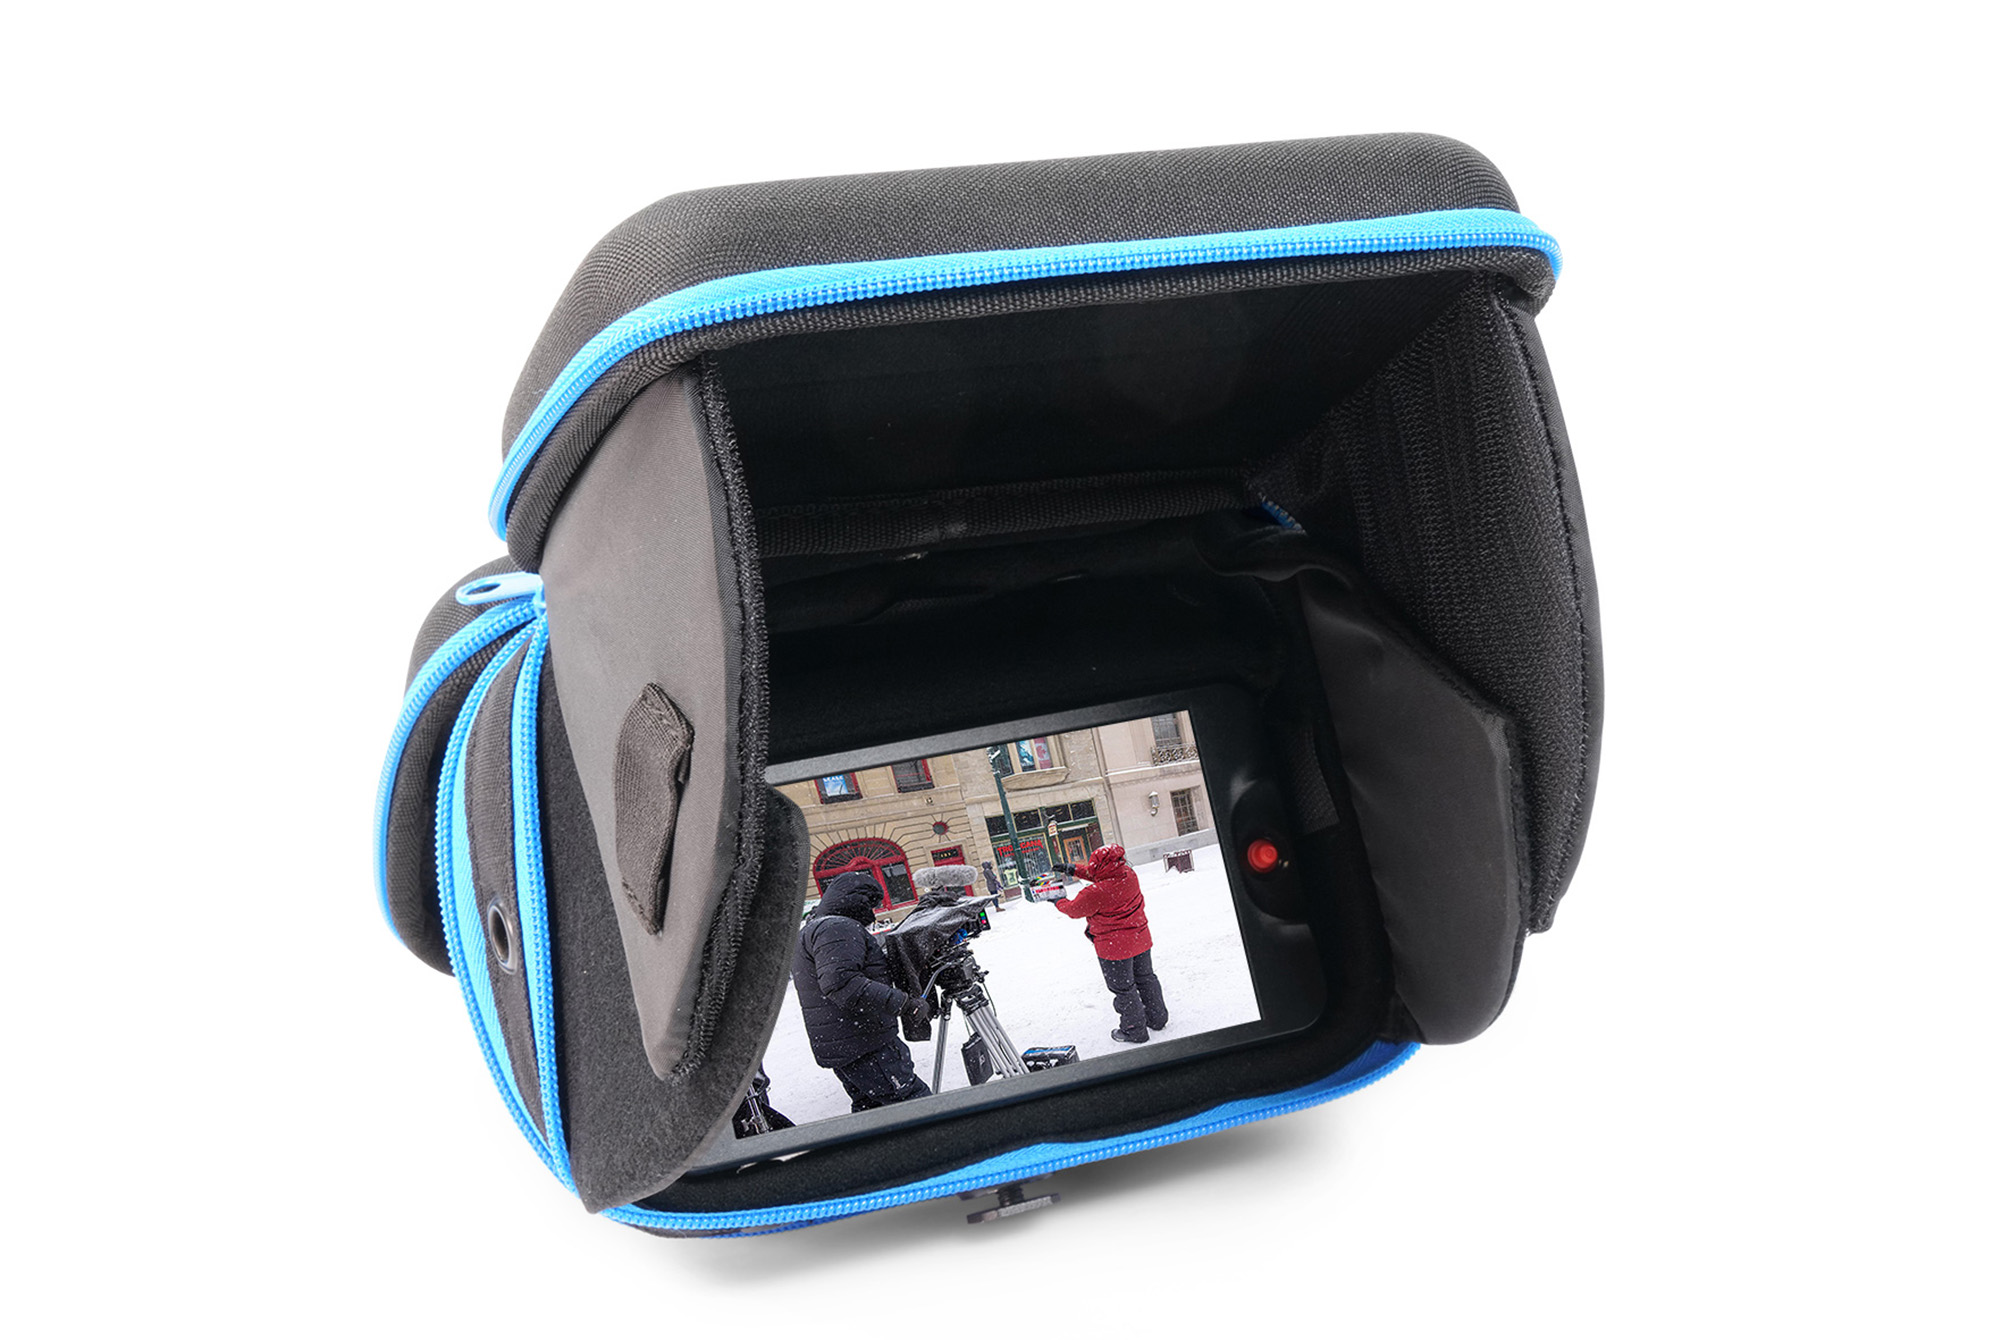 OR-140 Orca Hard Shell Case for 5" monitors